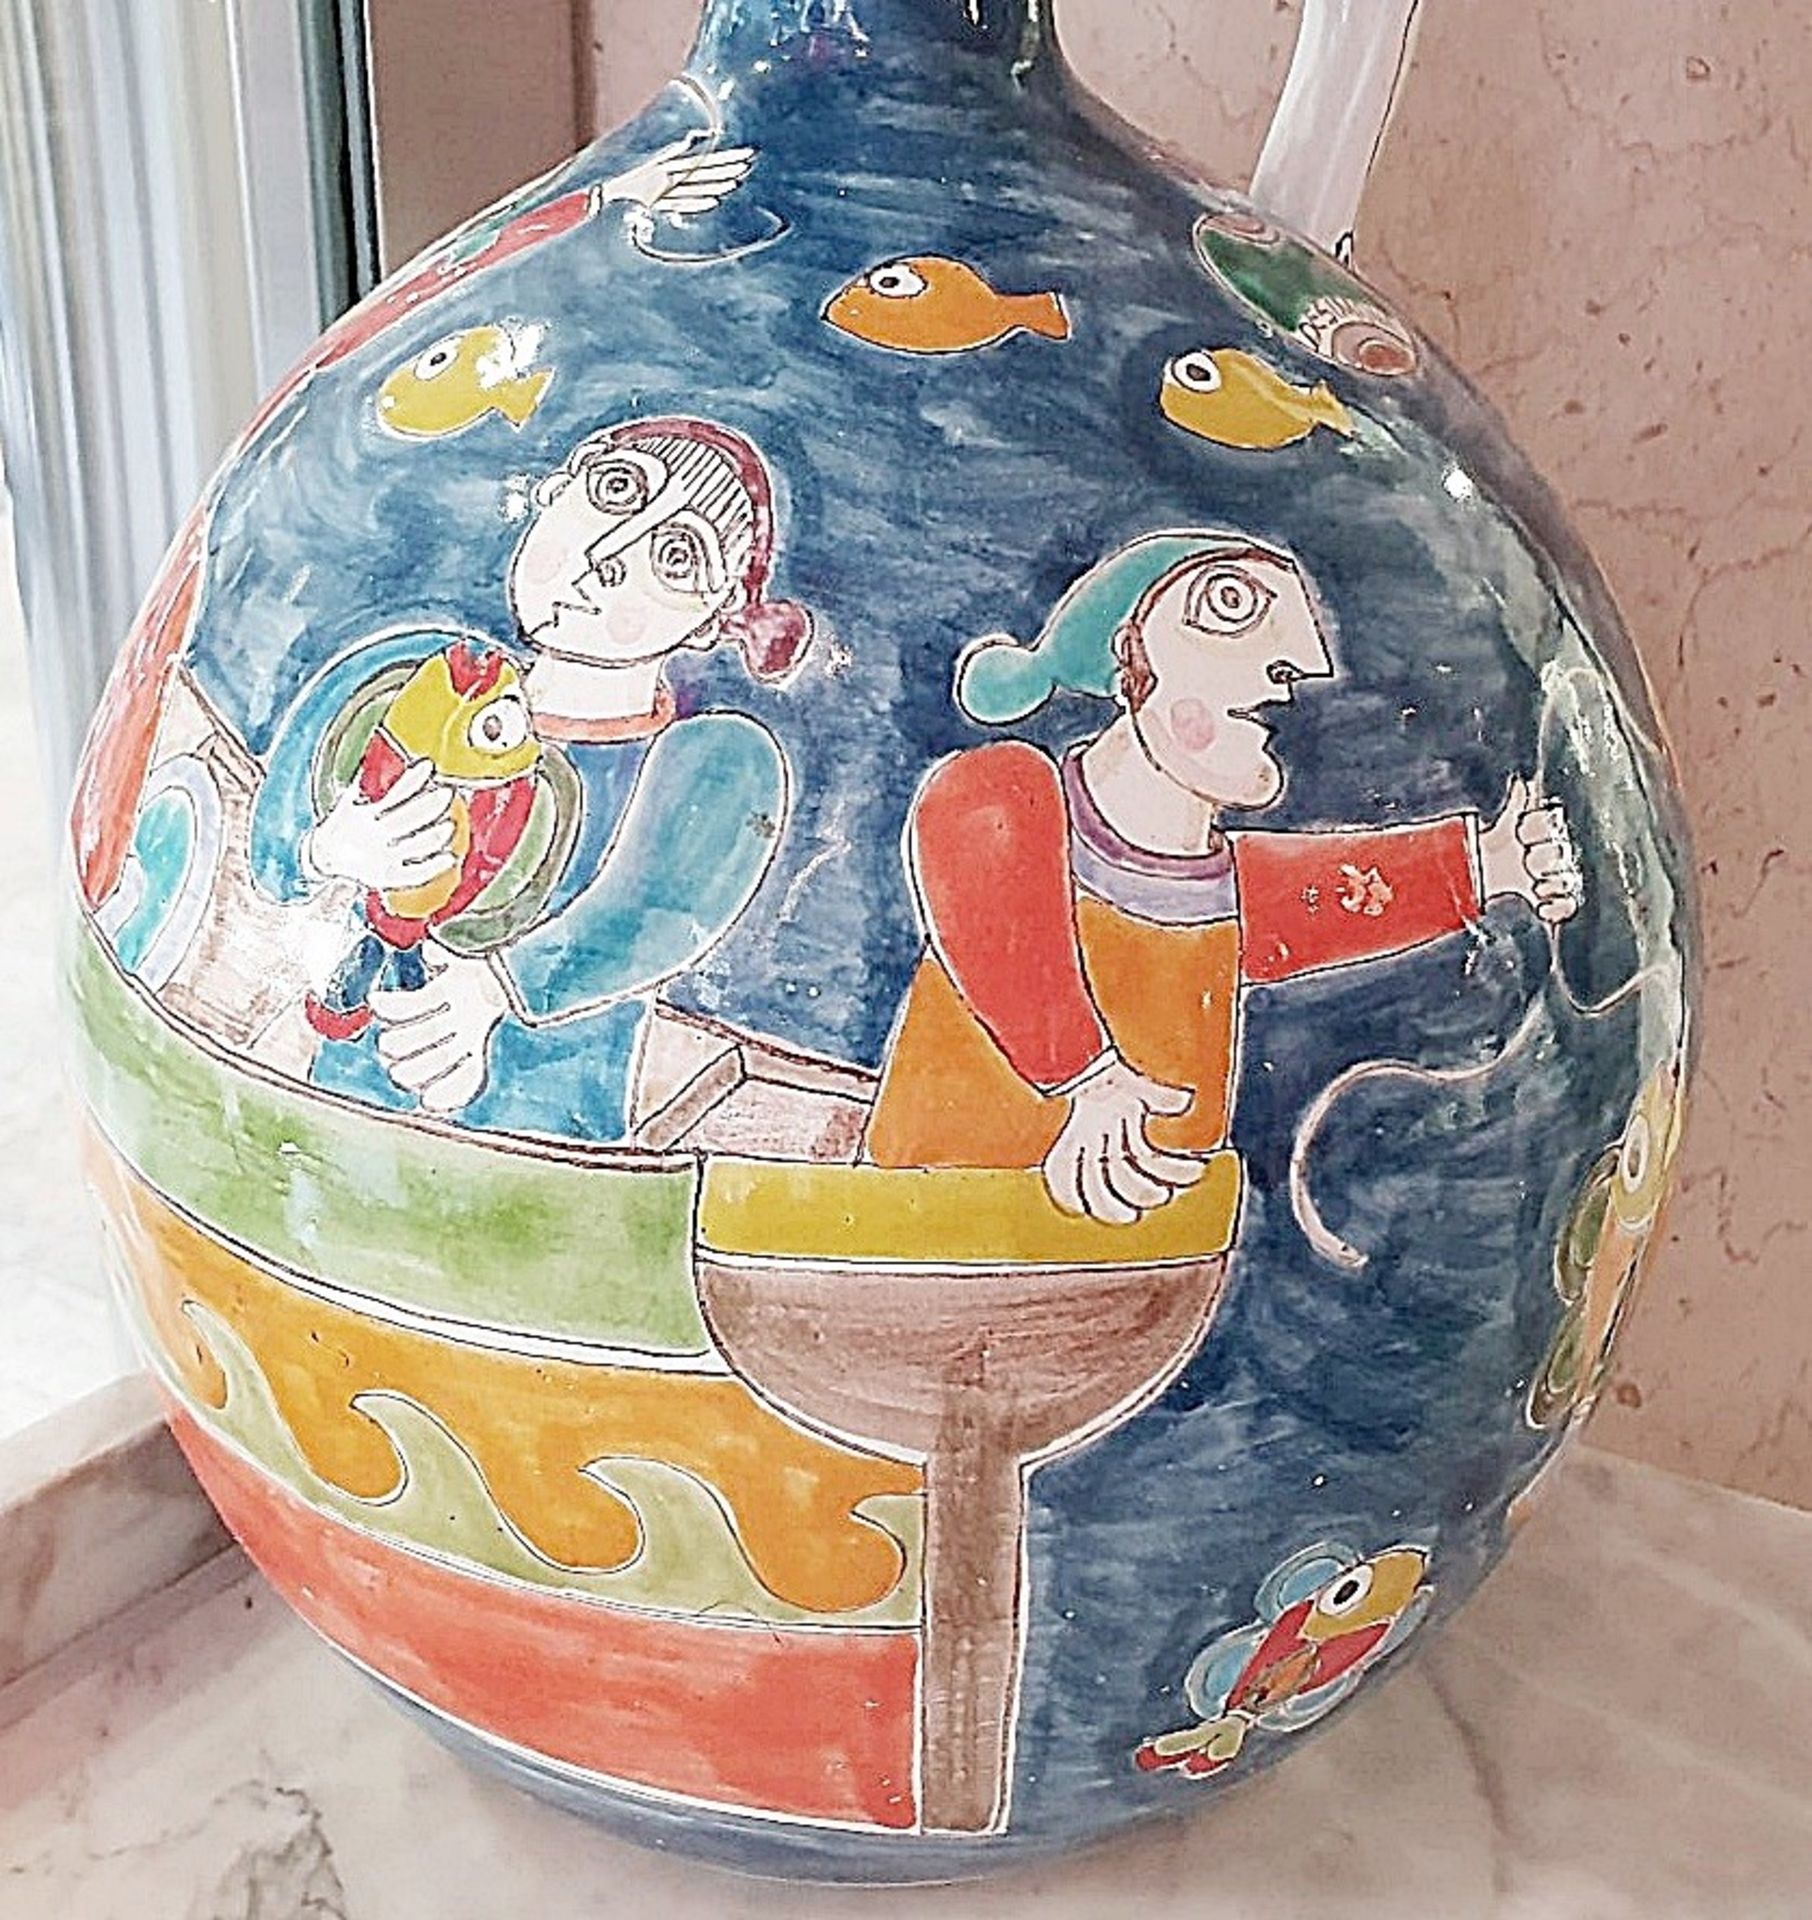 1 x Large Italian Handpainted 'Giovanni DeSimone' Fisherman Jug / Flask - Signed By The Artist - - Image 2 of 8